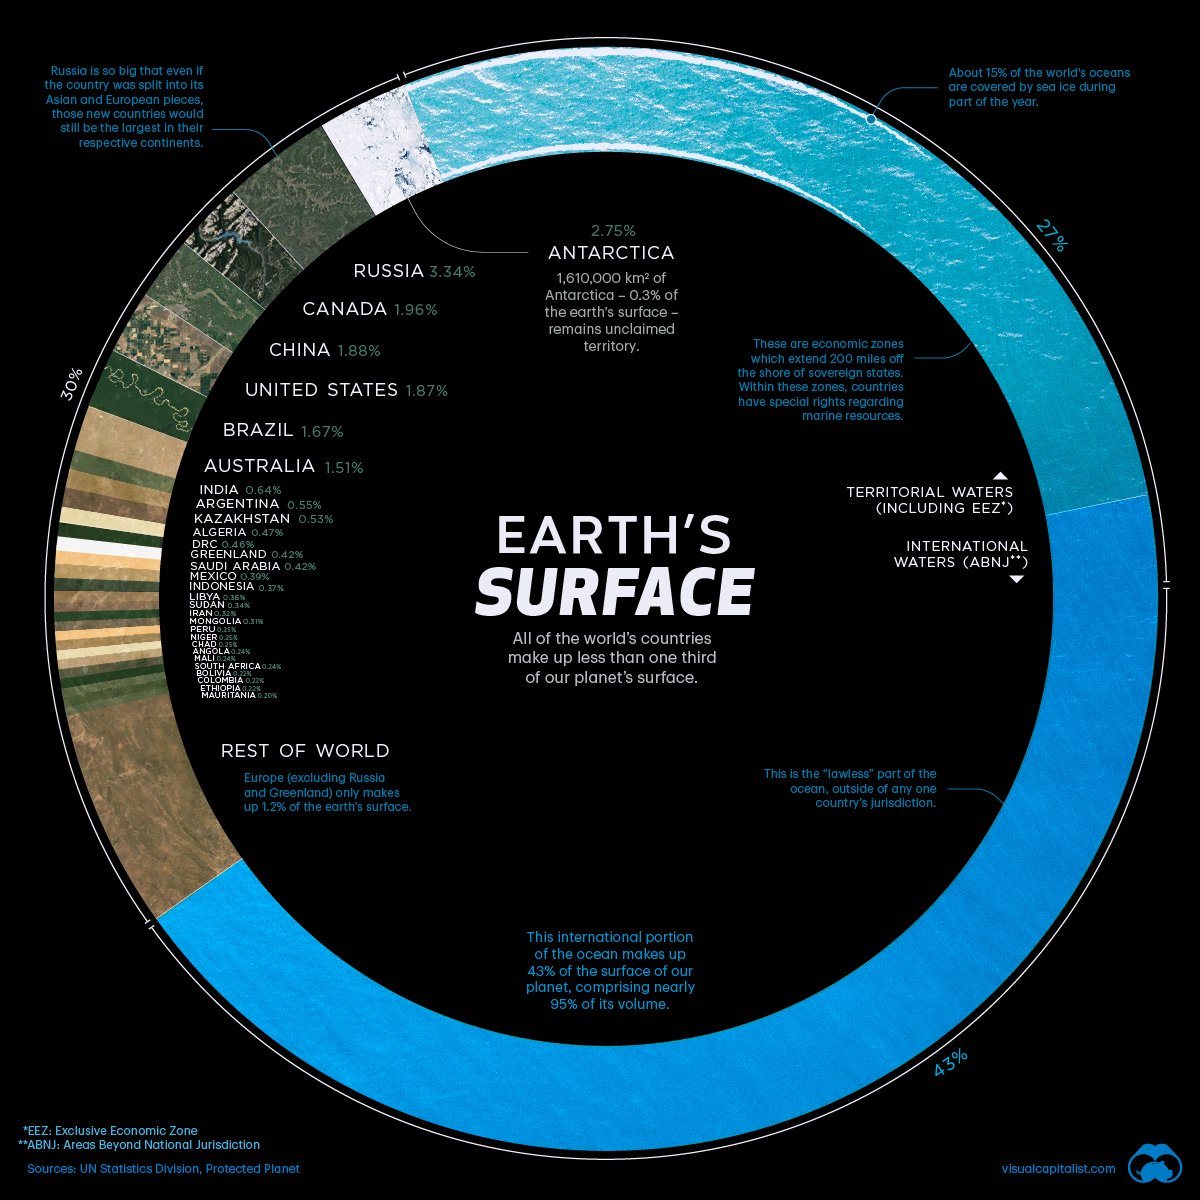 Visualizing Countries by Share of Earth’s Surface 🌍️ From the Archive: visualcapitalist.com/countries-by-s…